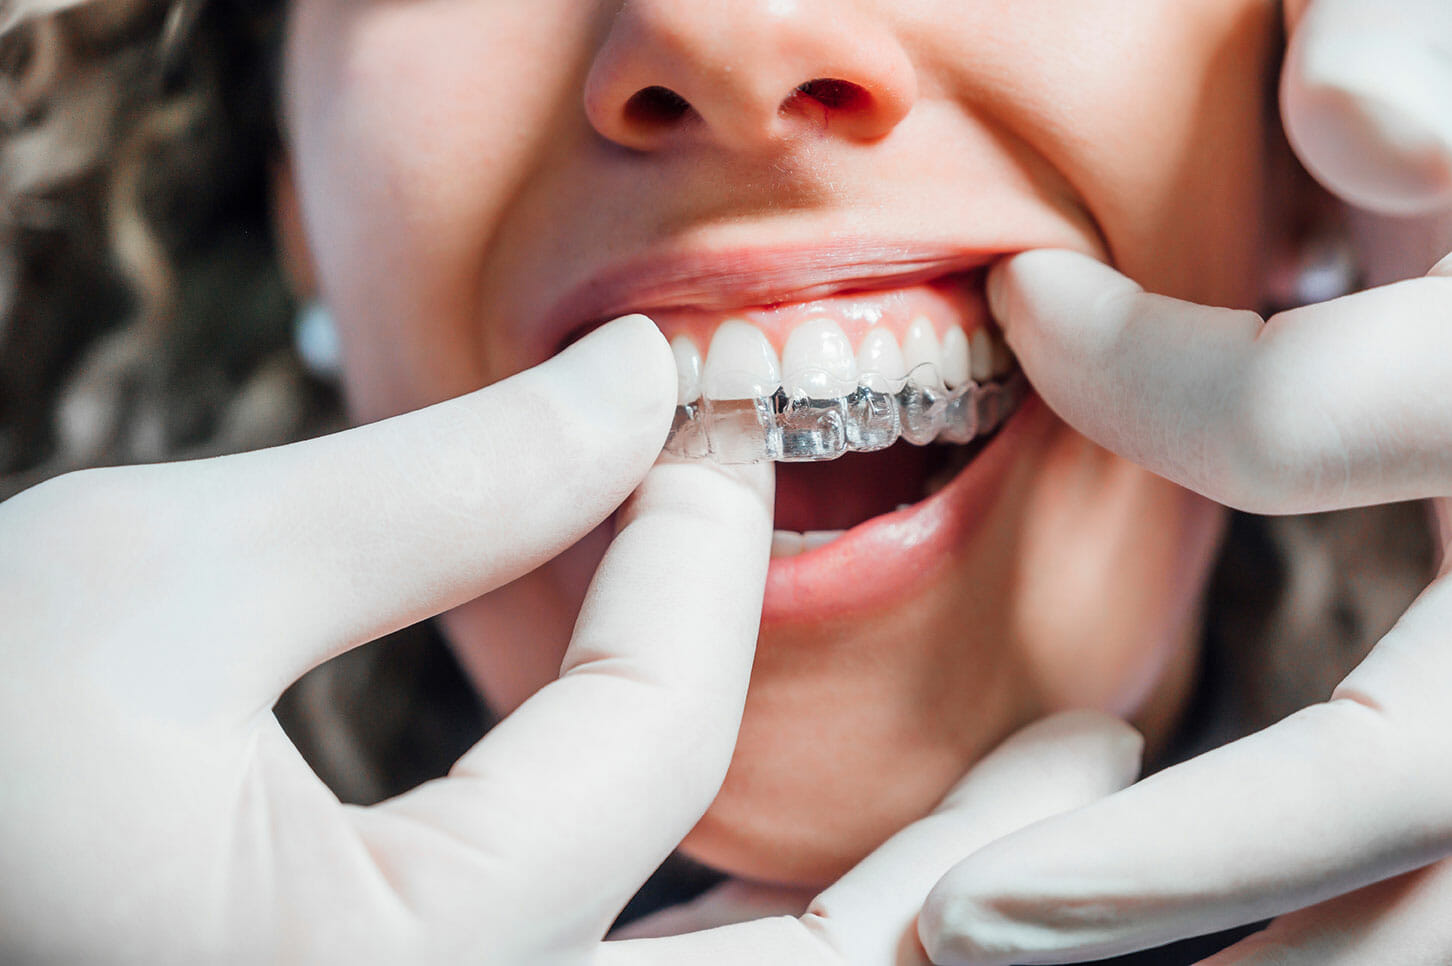 Dentist Putting Invisalign Retainer in Patient's Mouth